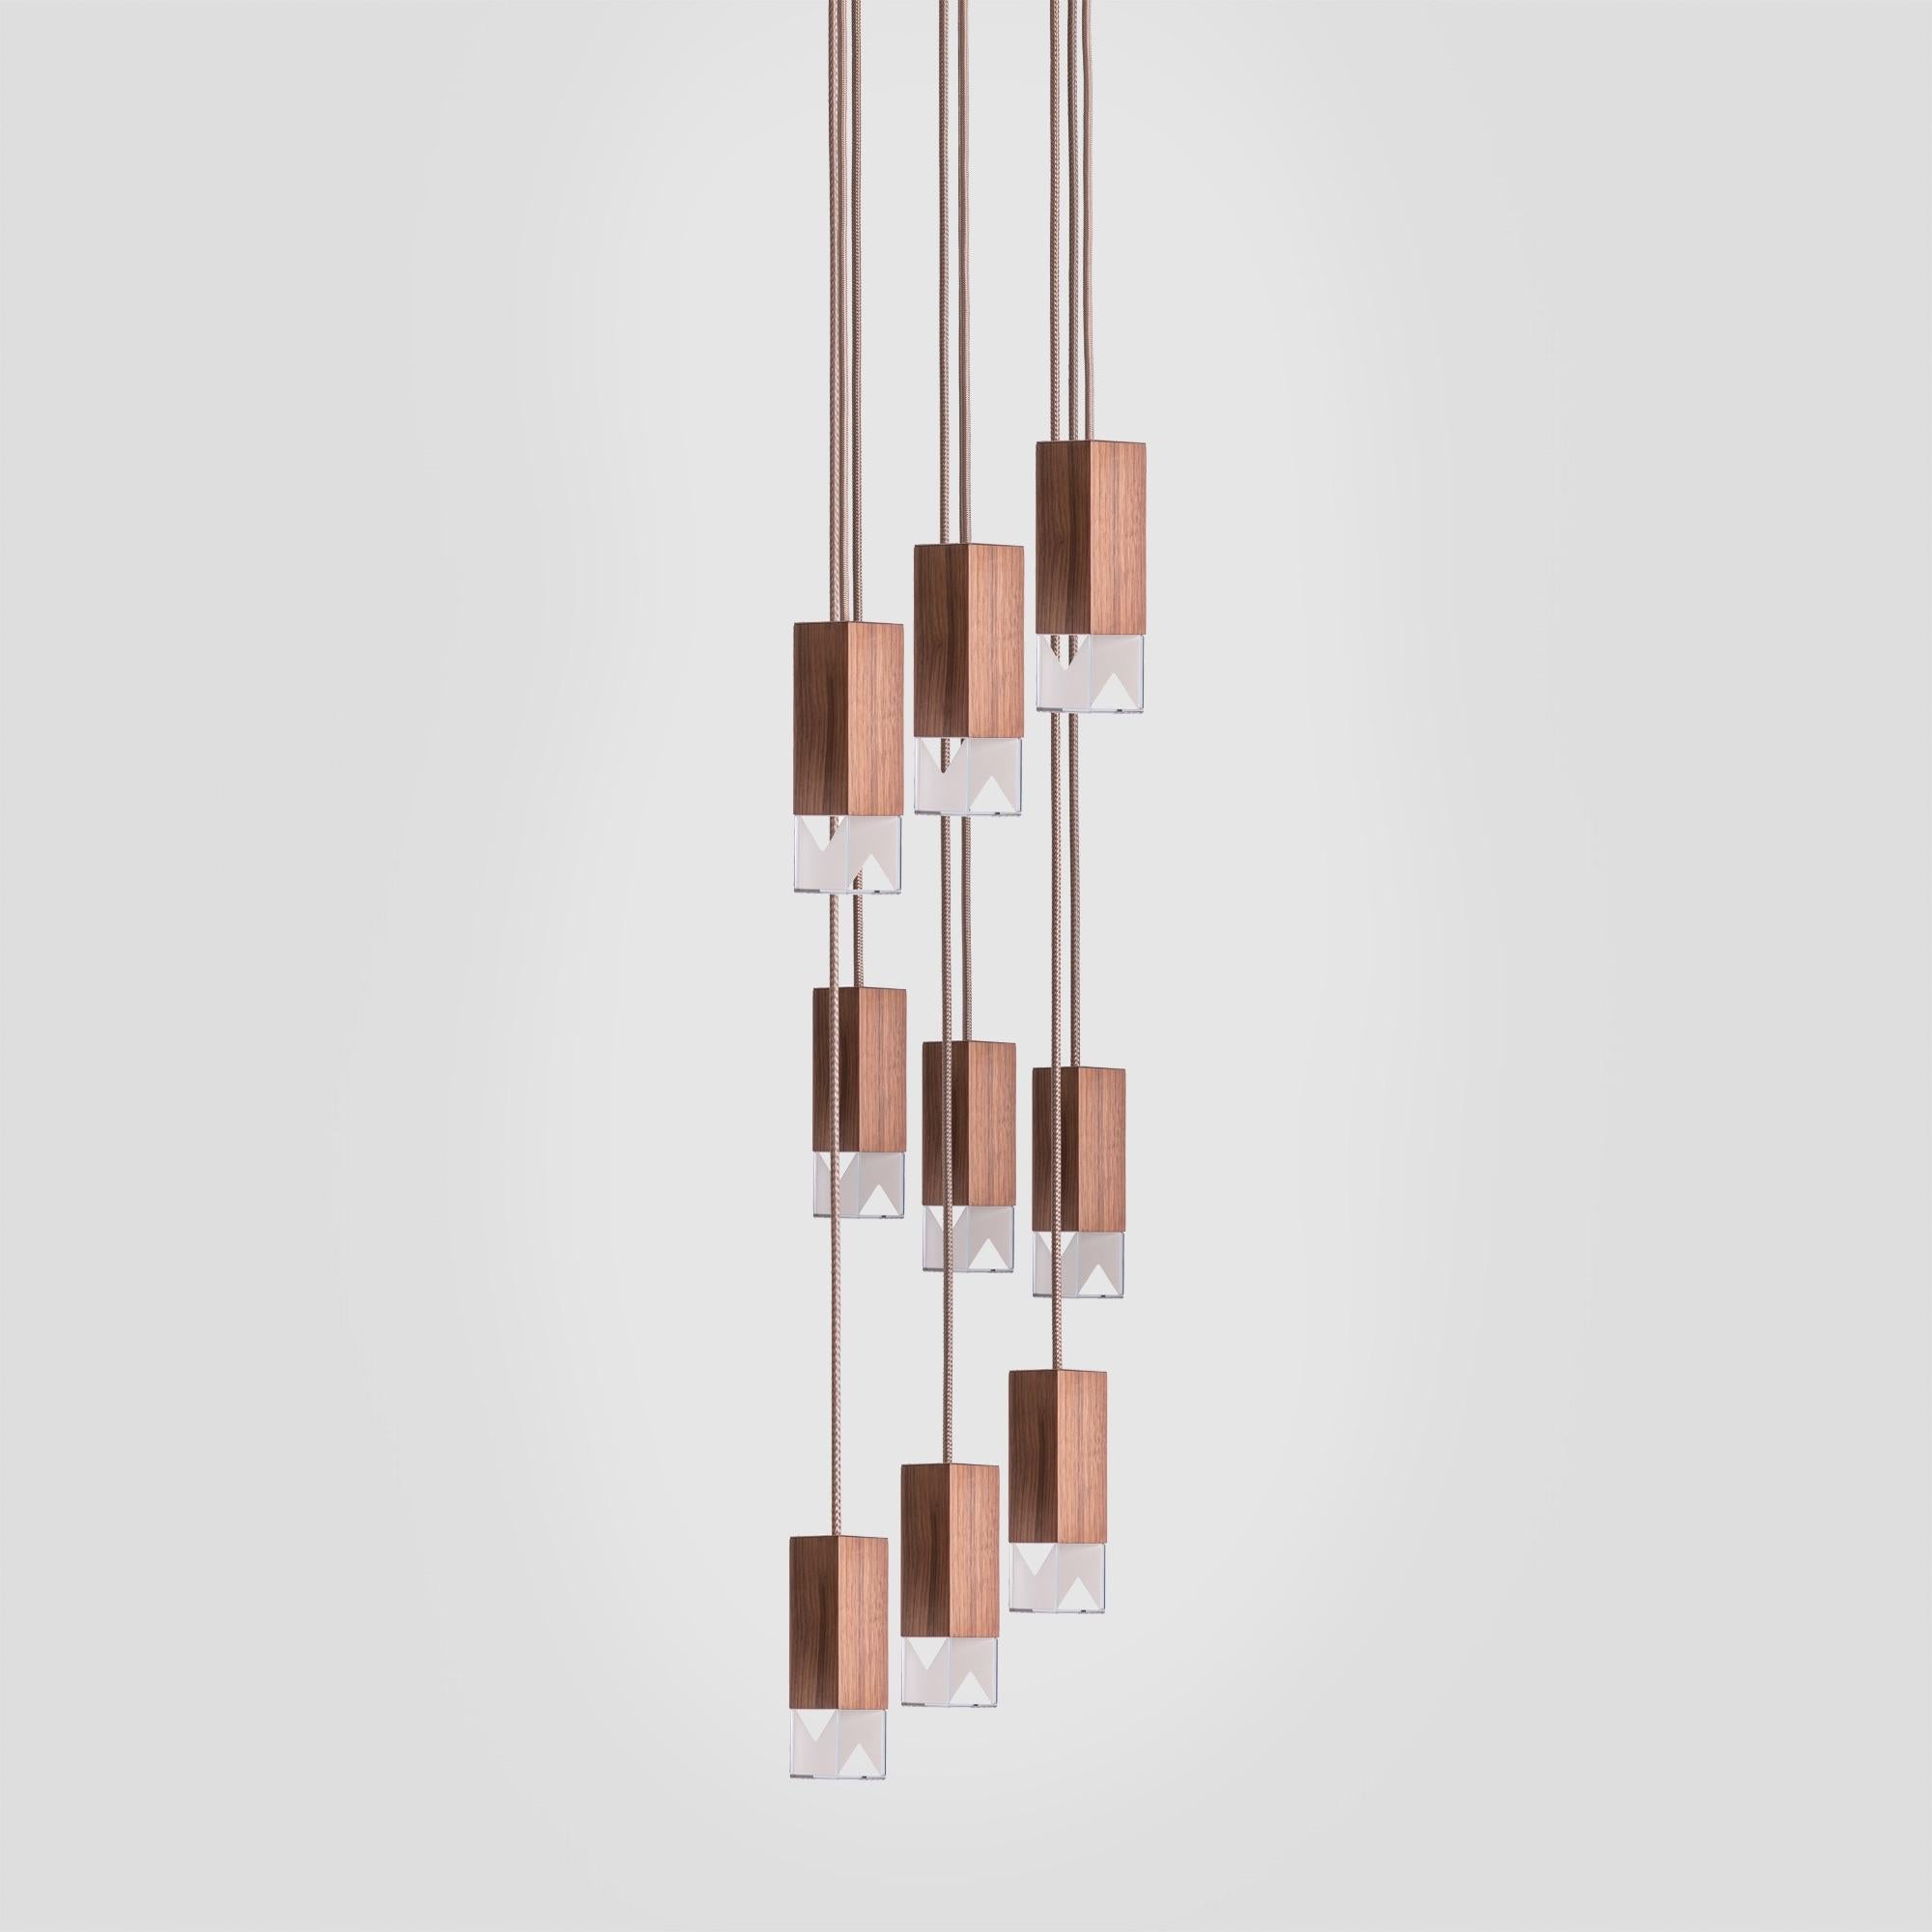 About
Ceiling Lamp 9 Light Chandelier Walnut Wood Handmade in Italy by Formaminima

Lamp/One WalnutWood 9 Light Chandelier from Chandeliers Series
Design by Formaminima
Chandelier
Materials:
Body lamp handcrafted in solid Canaletto walnut wood /